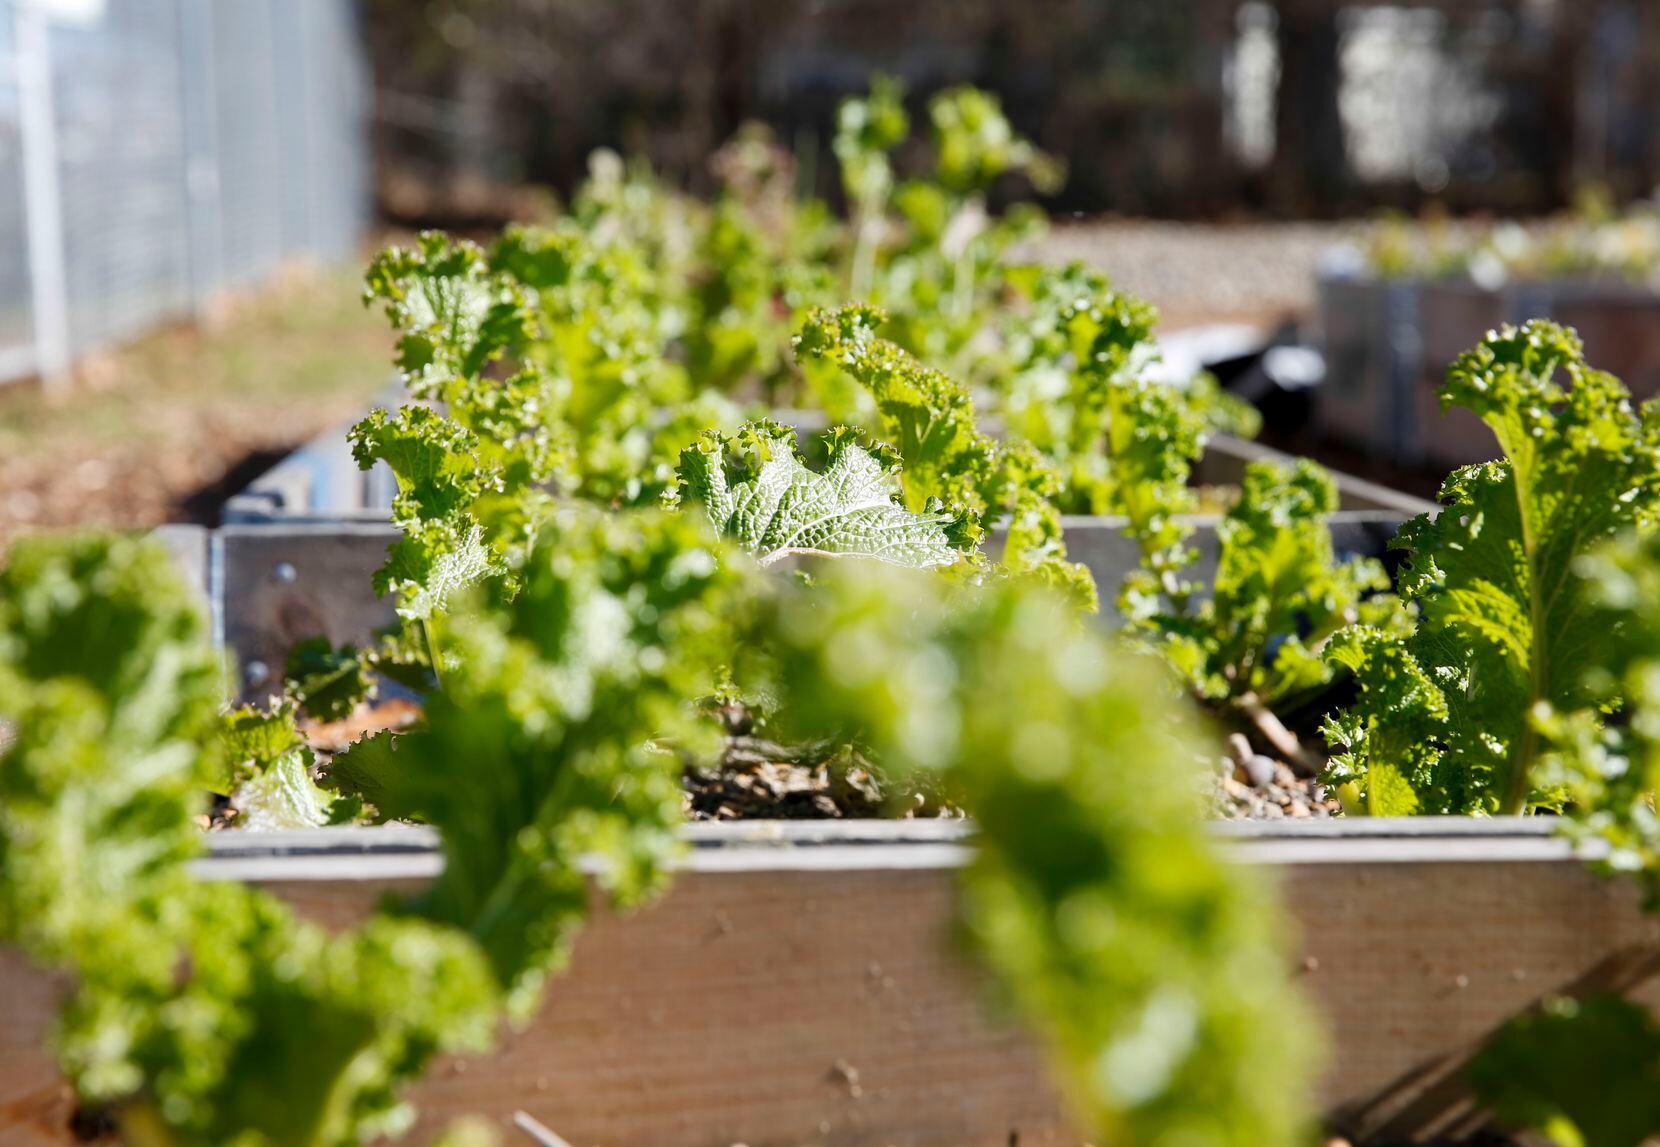 Mustard greens grow in community boxes at the Hatcher Station farm in South Dallas.